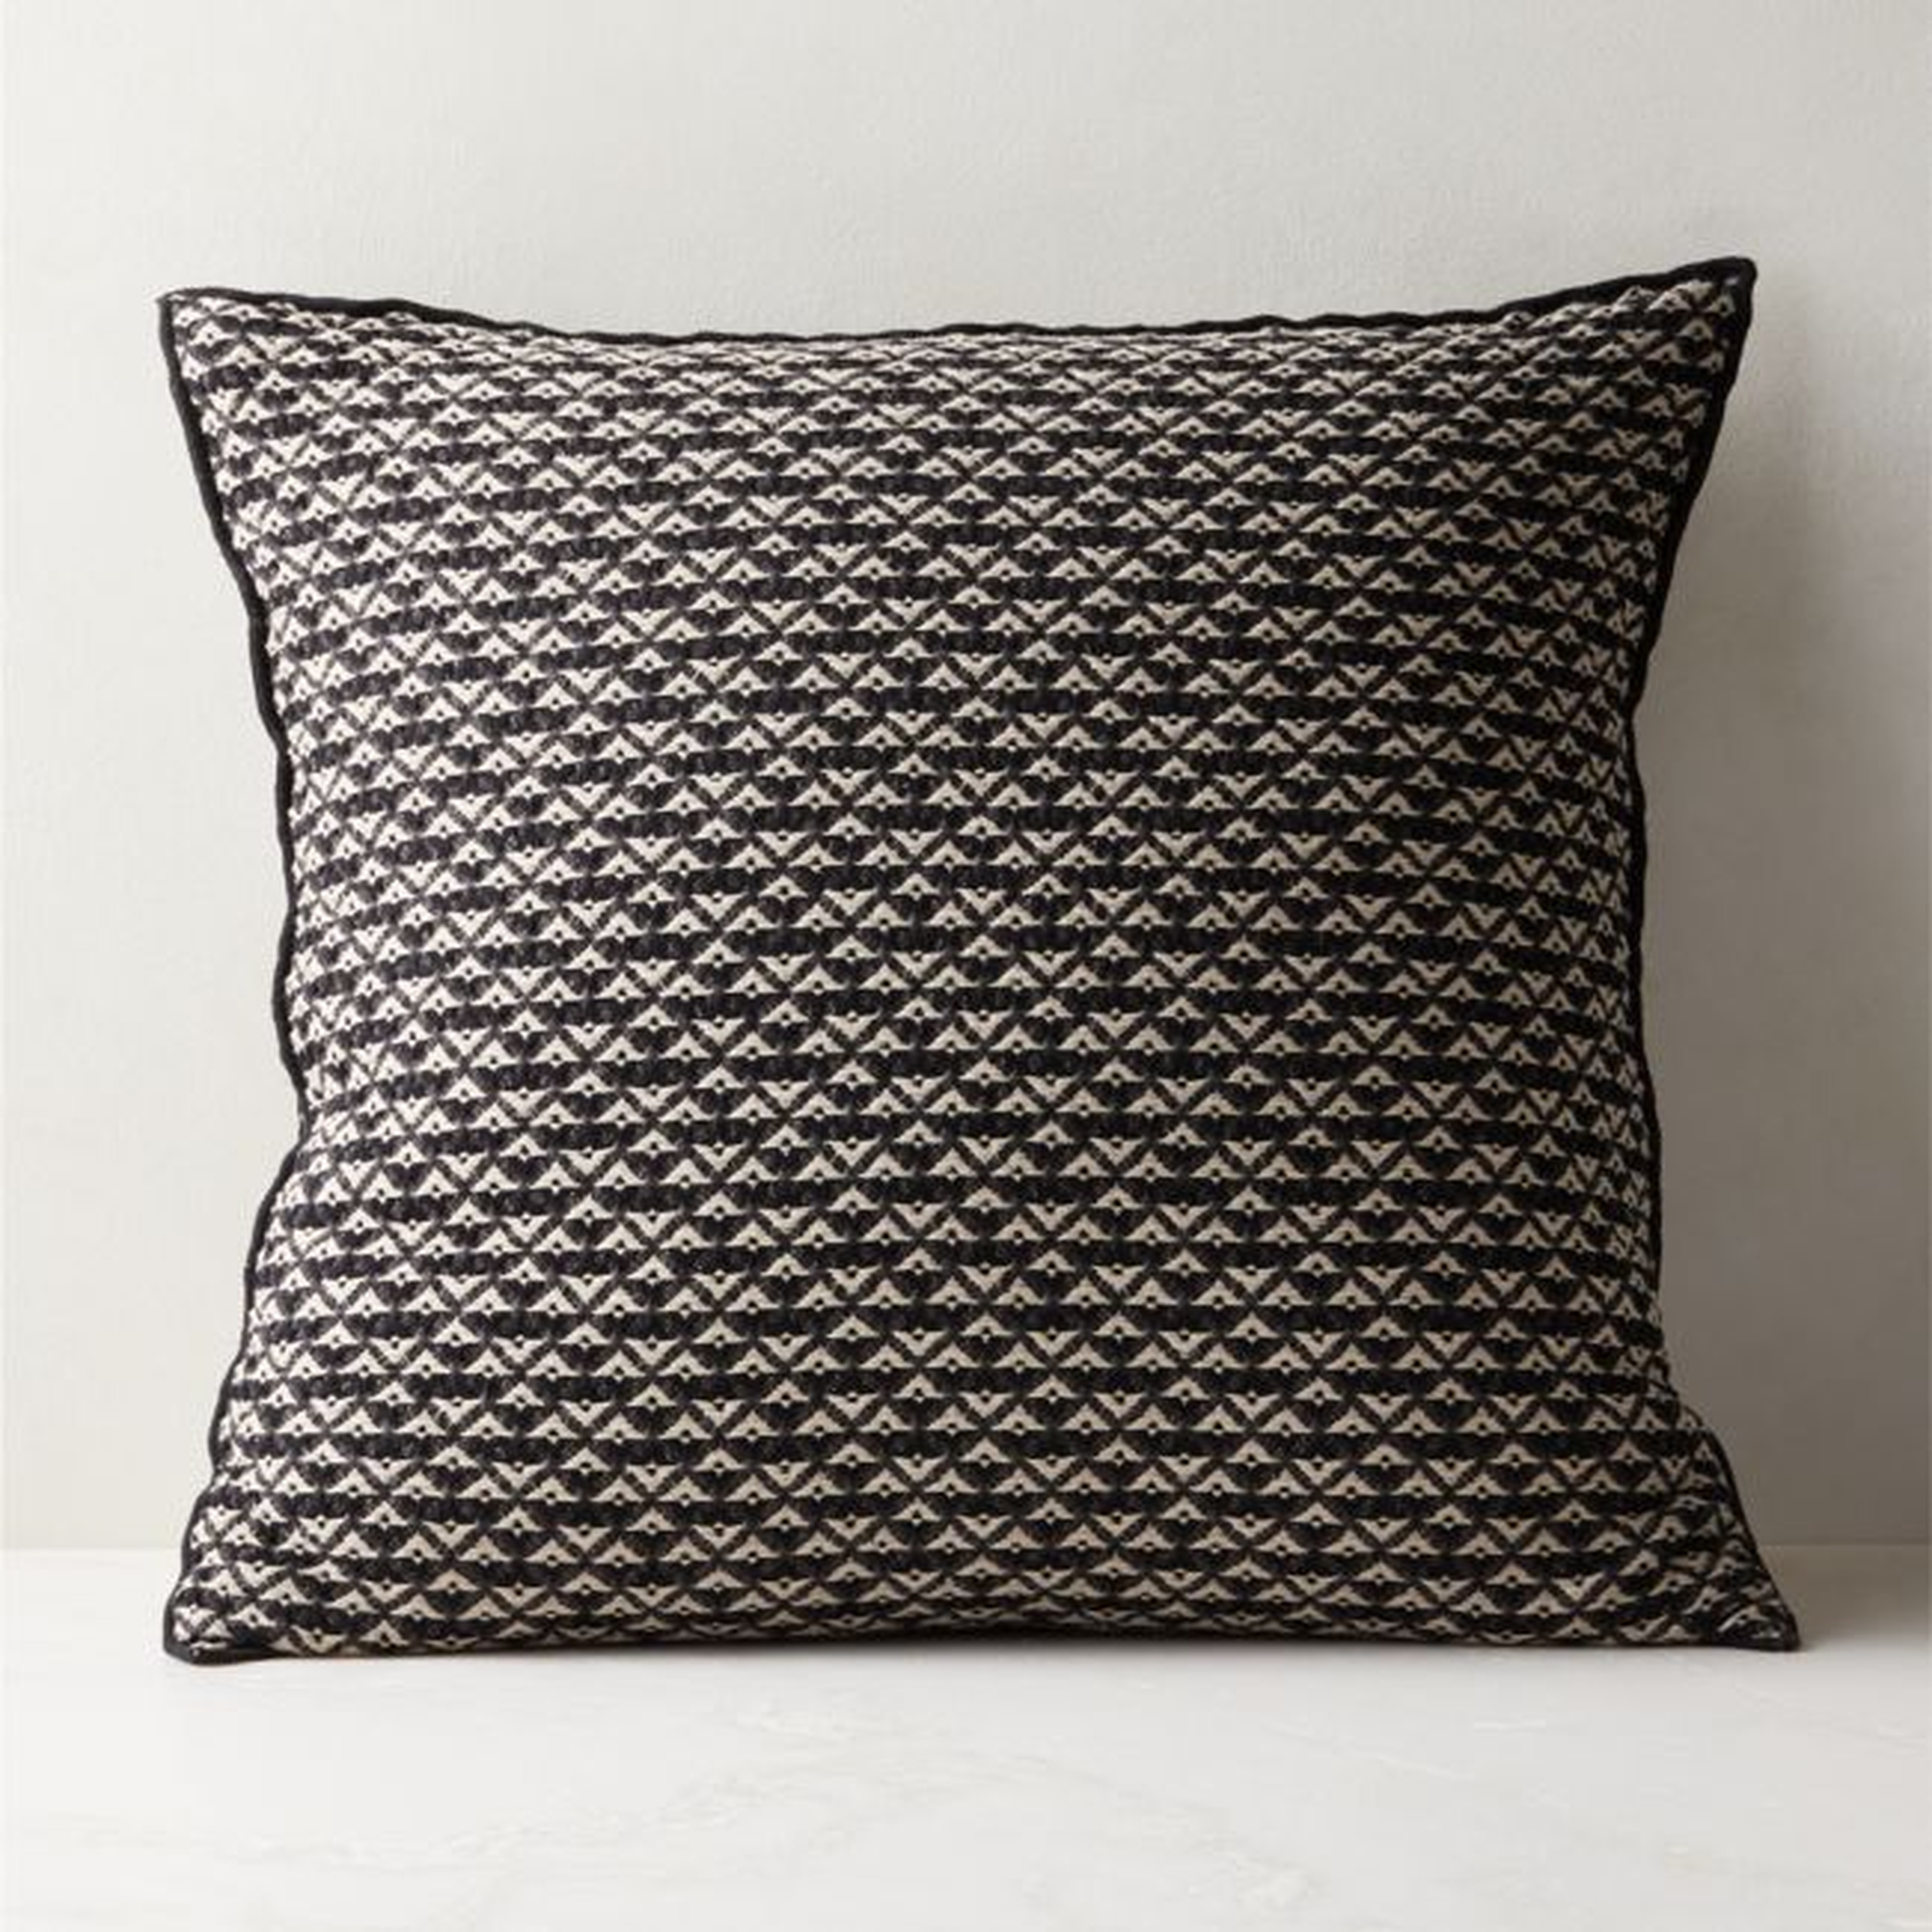 23" Lagos Organic Cotton Pillow With Feather-Down Insert - CB2